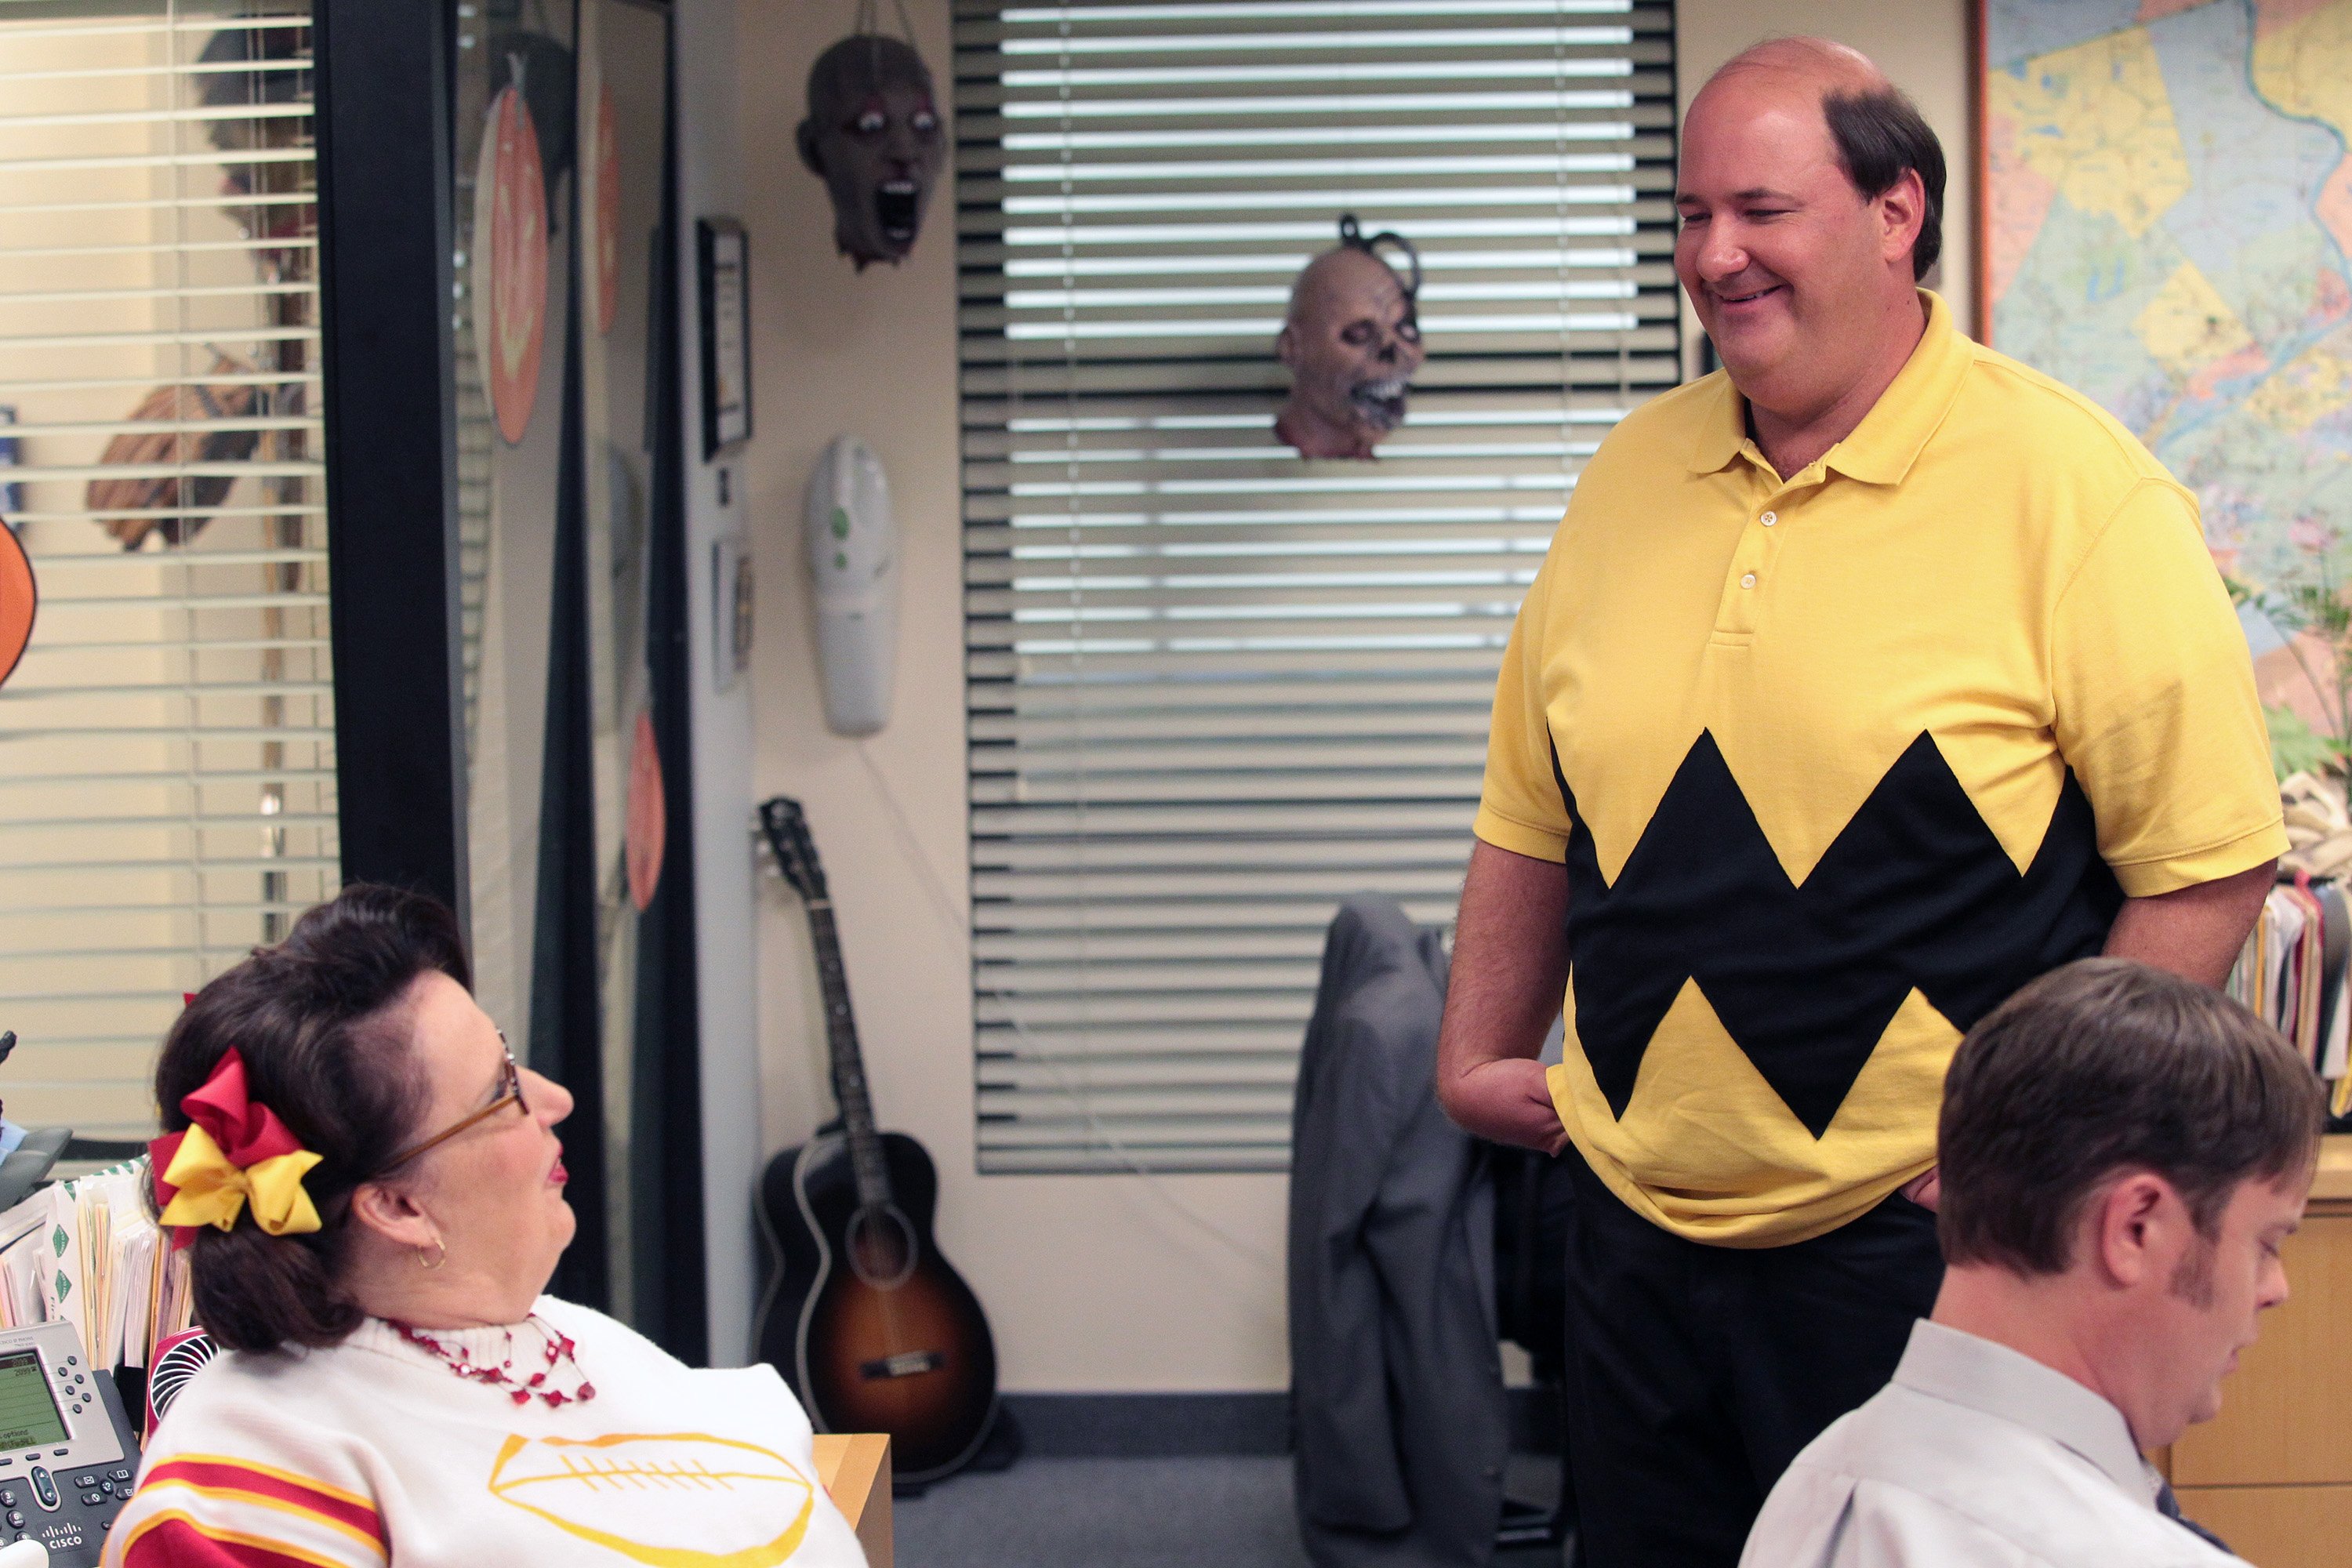 Phyllis Vance (Phyllis Smith) and Kevin Malone (Brian Baumgartner) dressed for Halloween in season 9 of 'The Office'